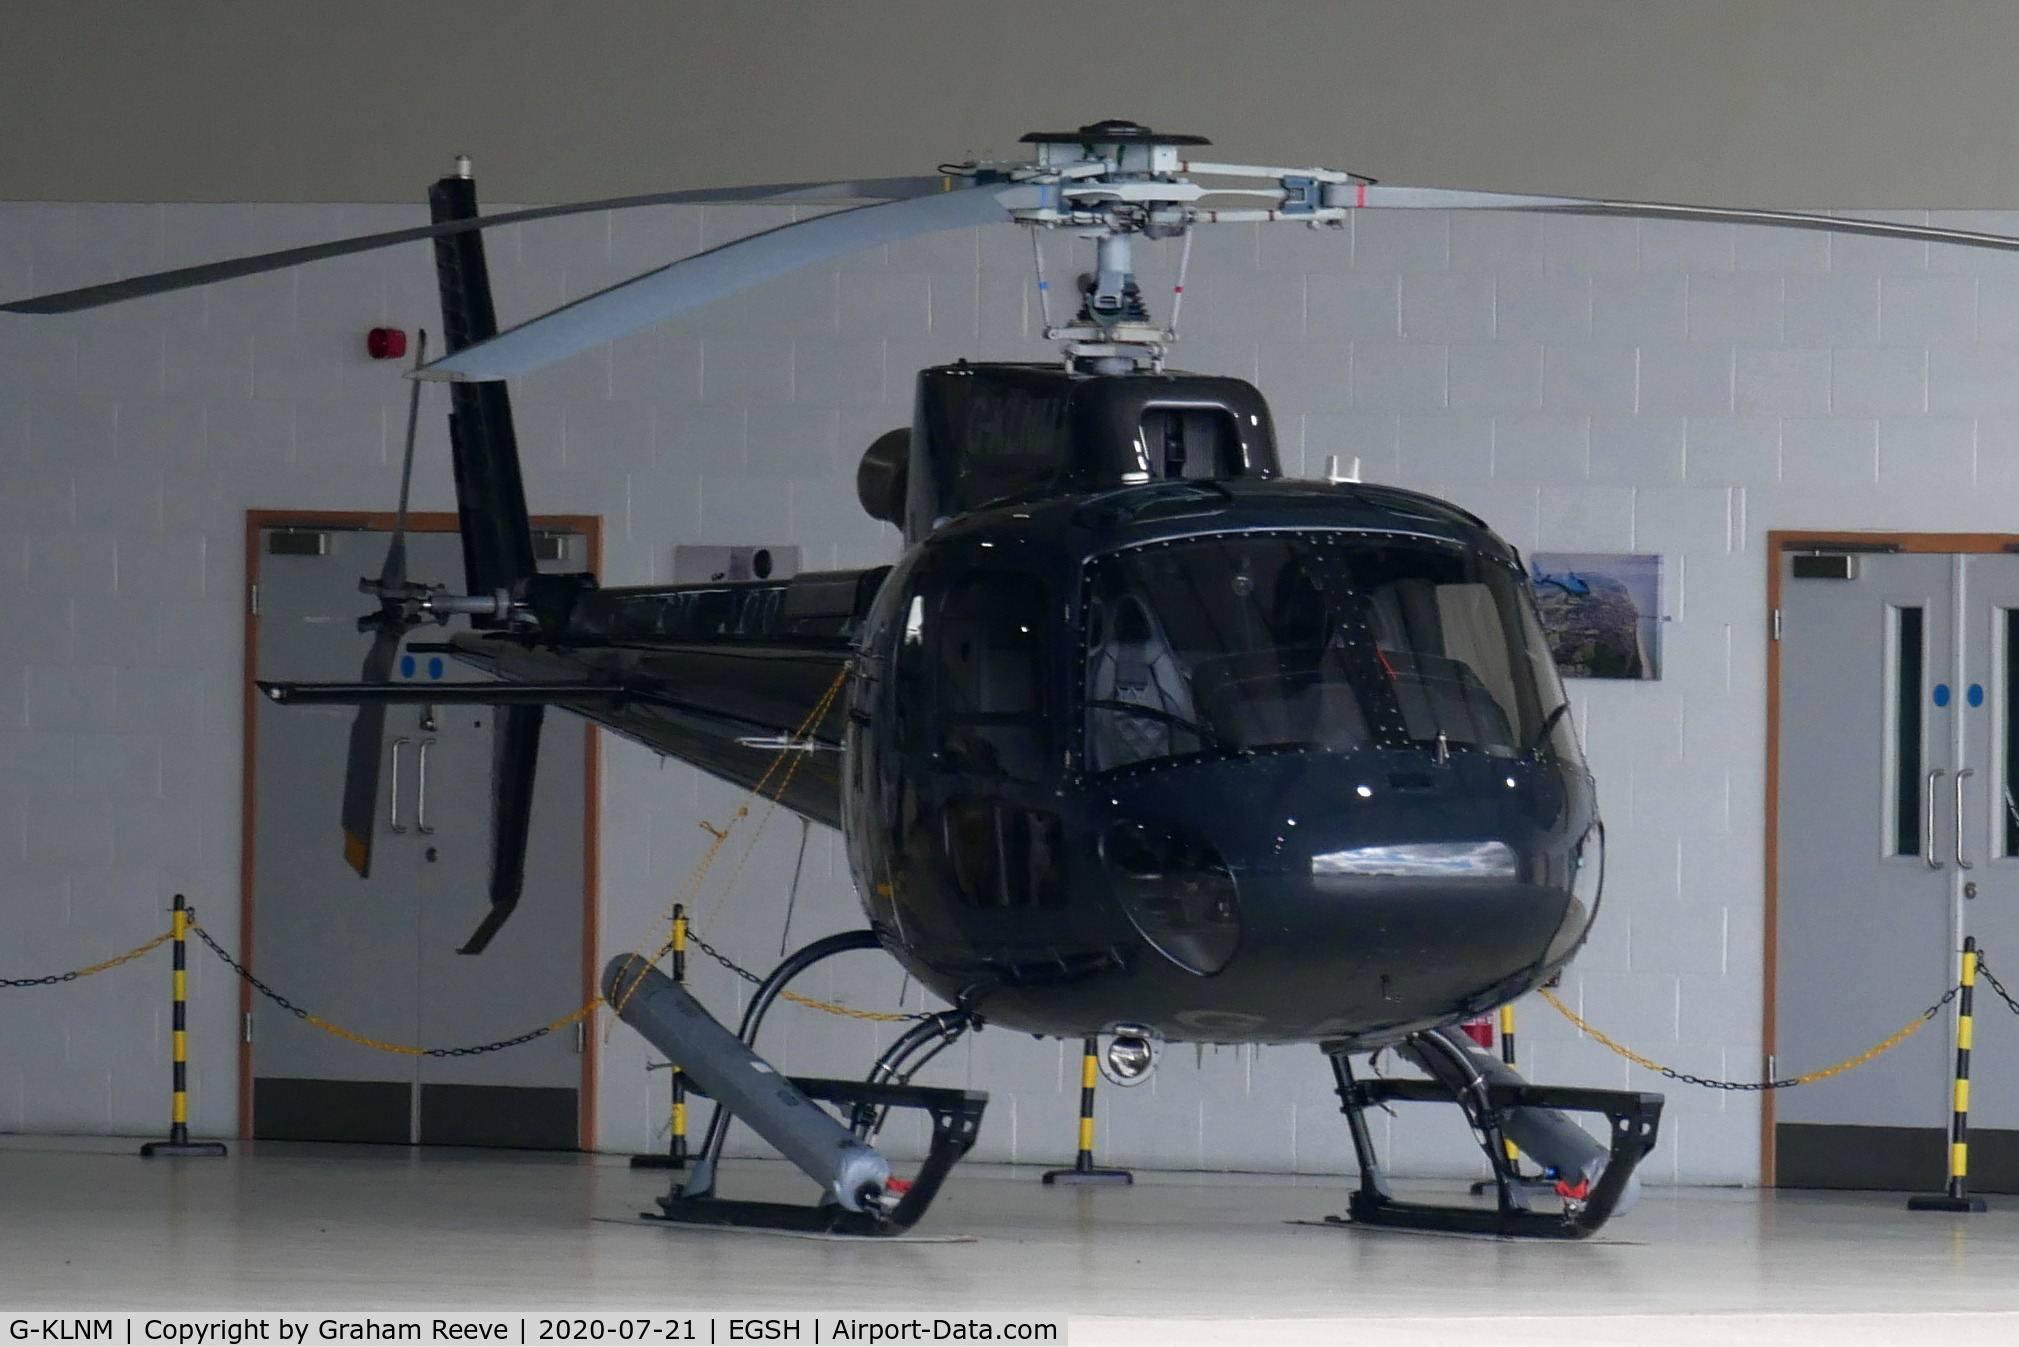 G-KLNM, 2014 Eurocopter AS-350B-3 Ecureuil Ecureuil C/N 7827, In the hangar at Norwich.